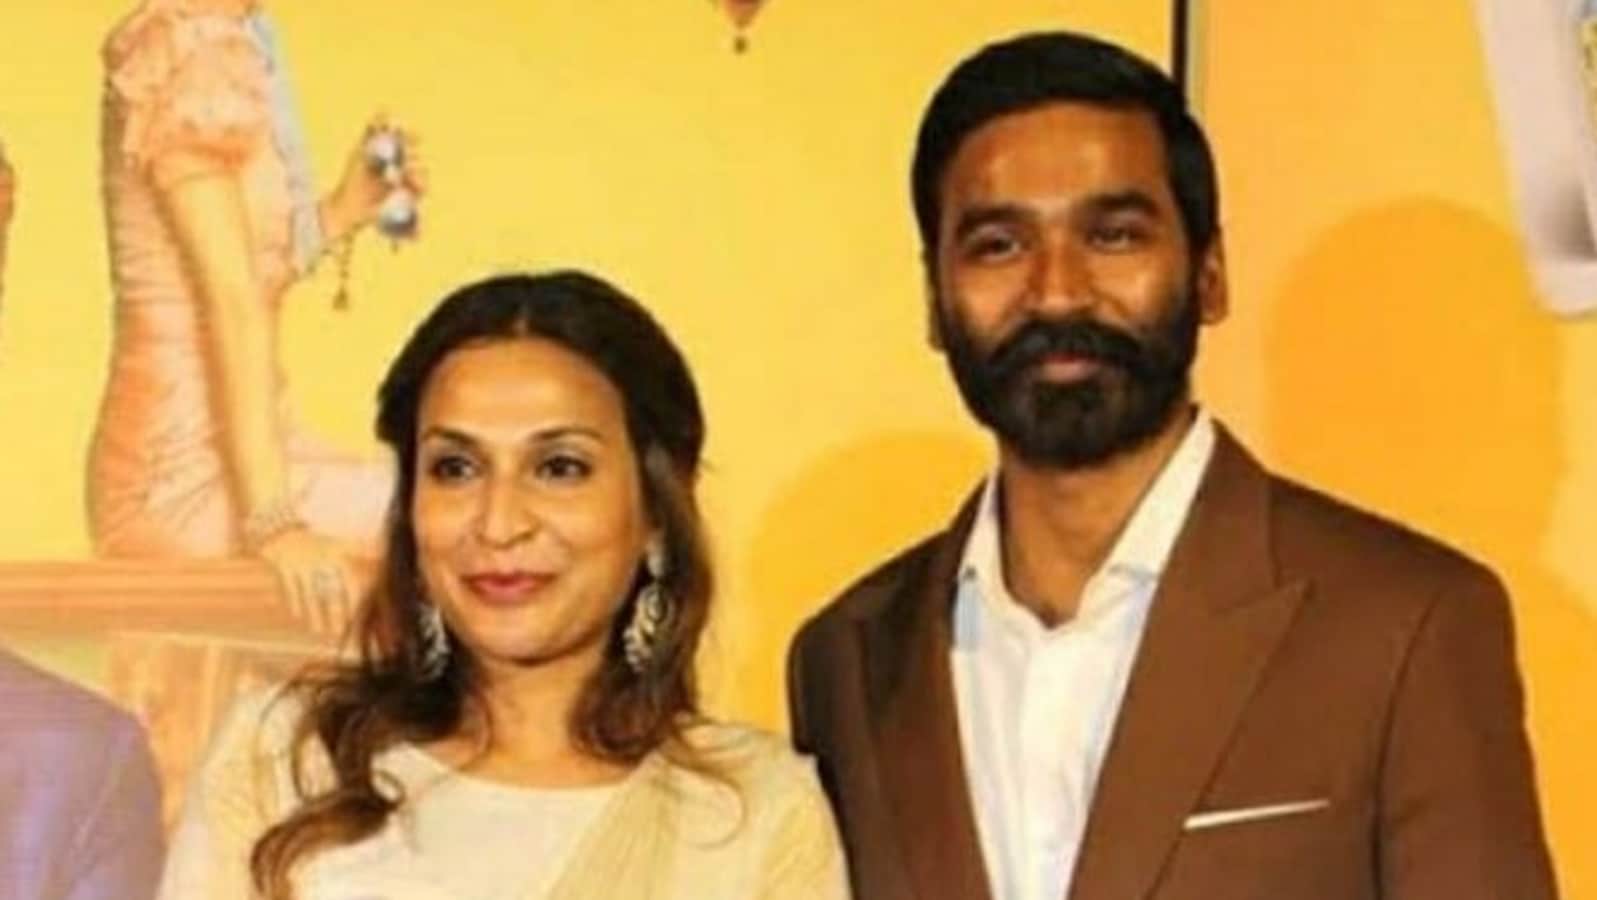 Dhanush announces separation from wife Aishwarya Rajinikanth after 18 years together: 'Please respect our decision' - Hindustan Times